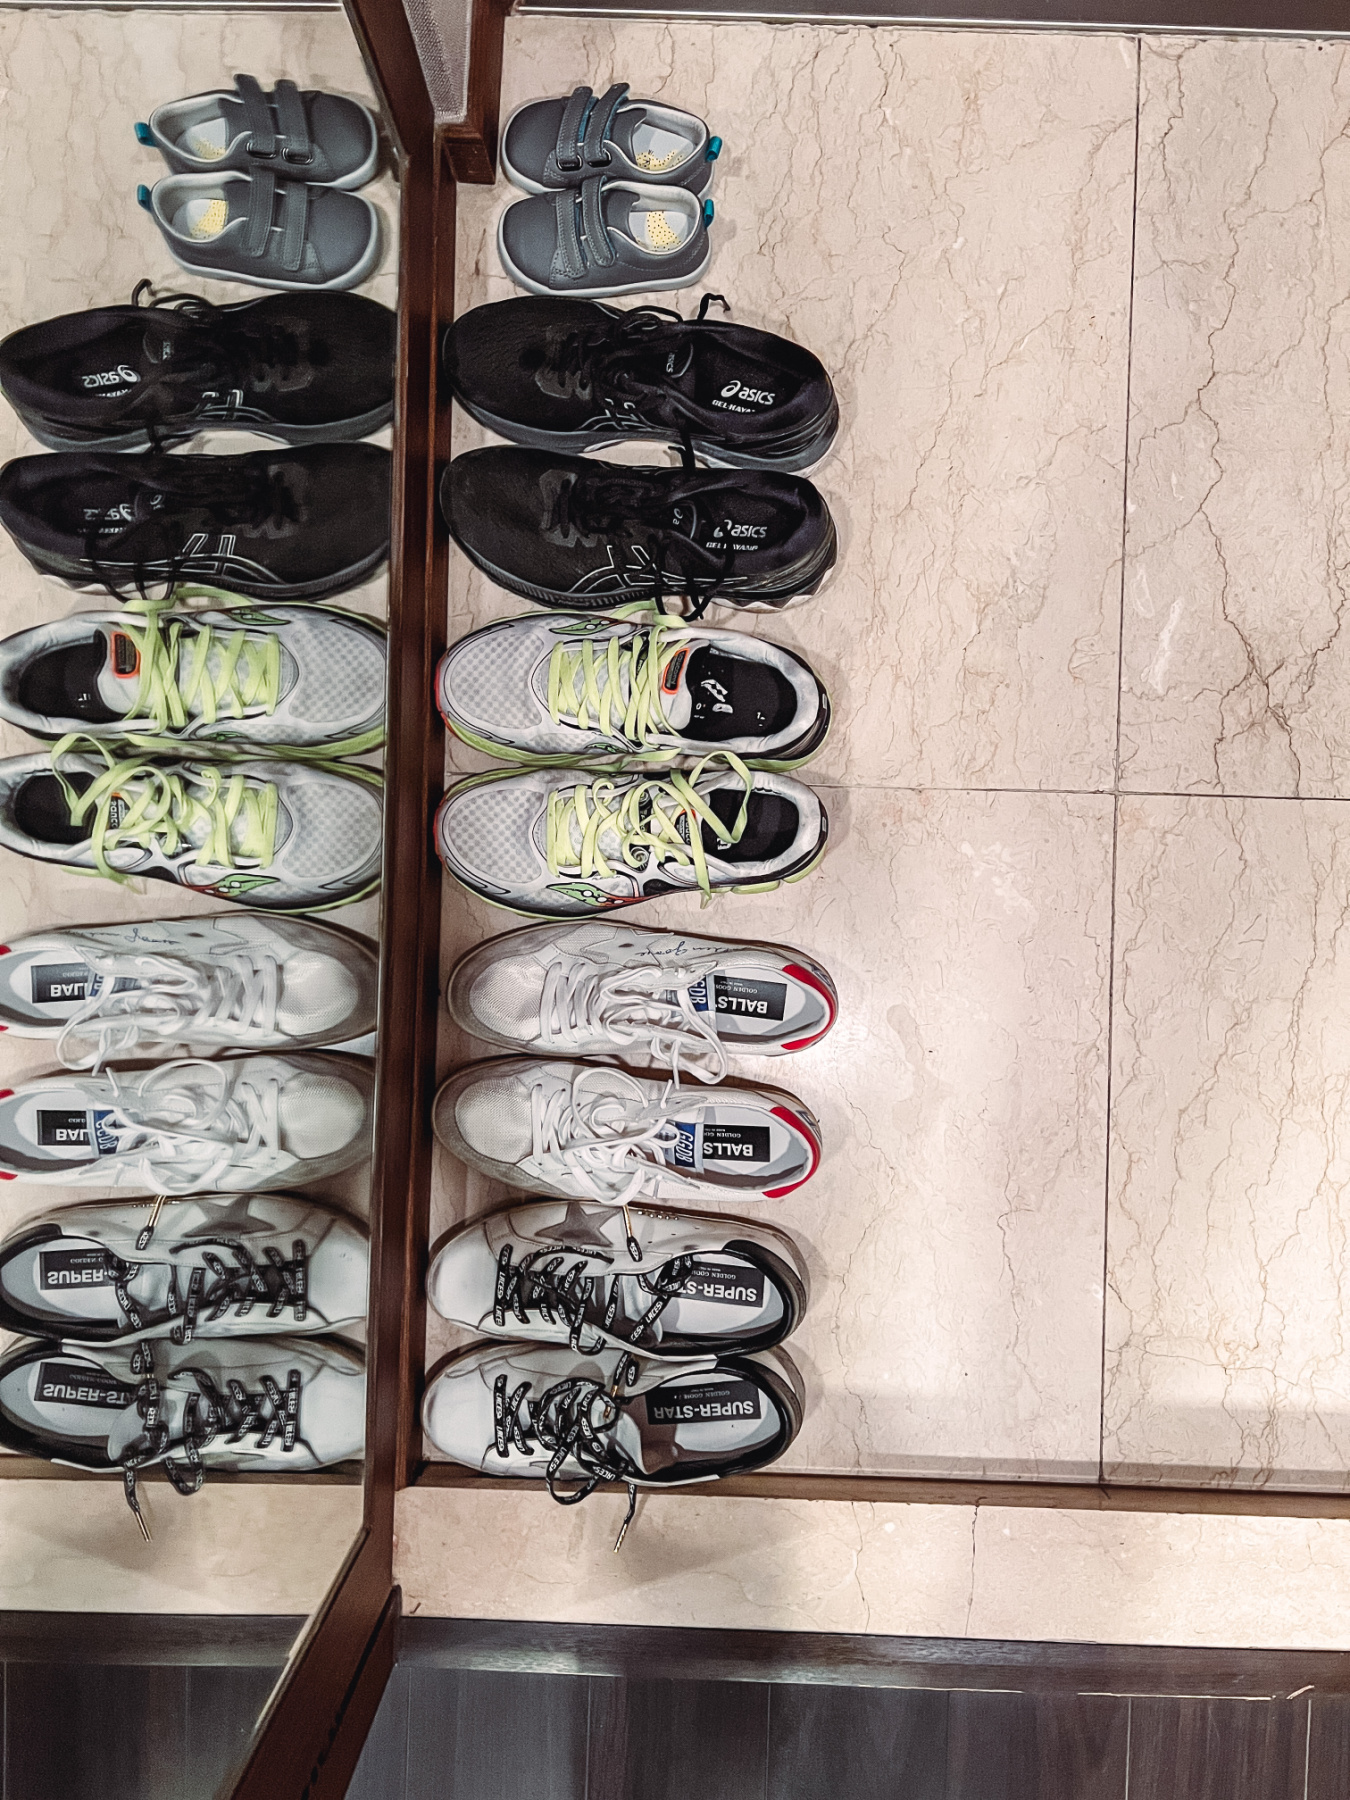 shoes lined up in hotel room